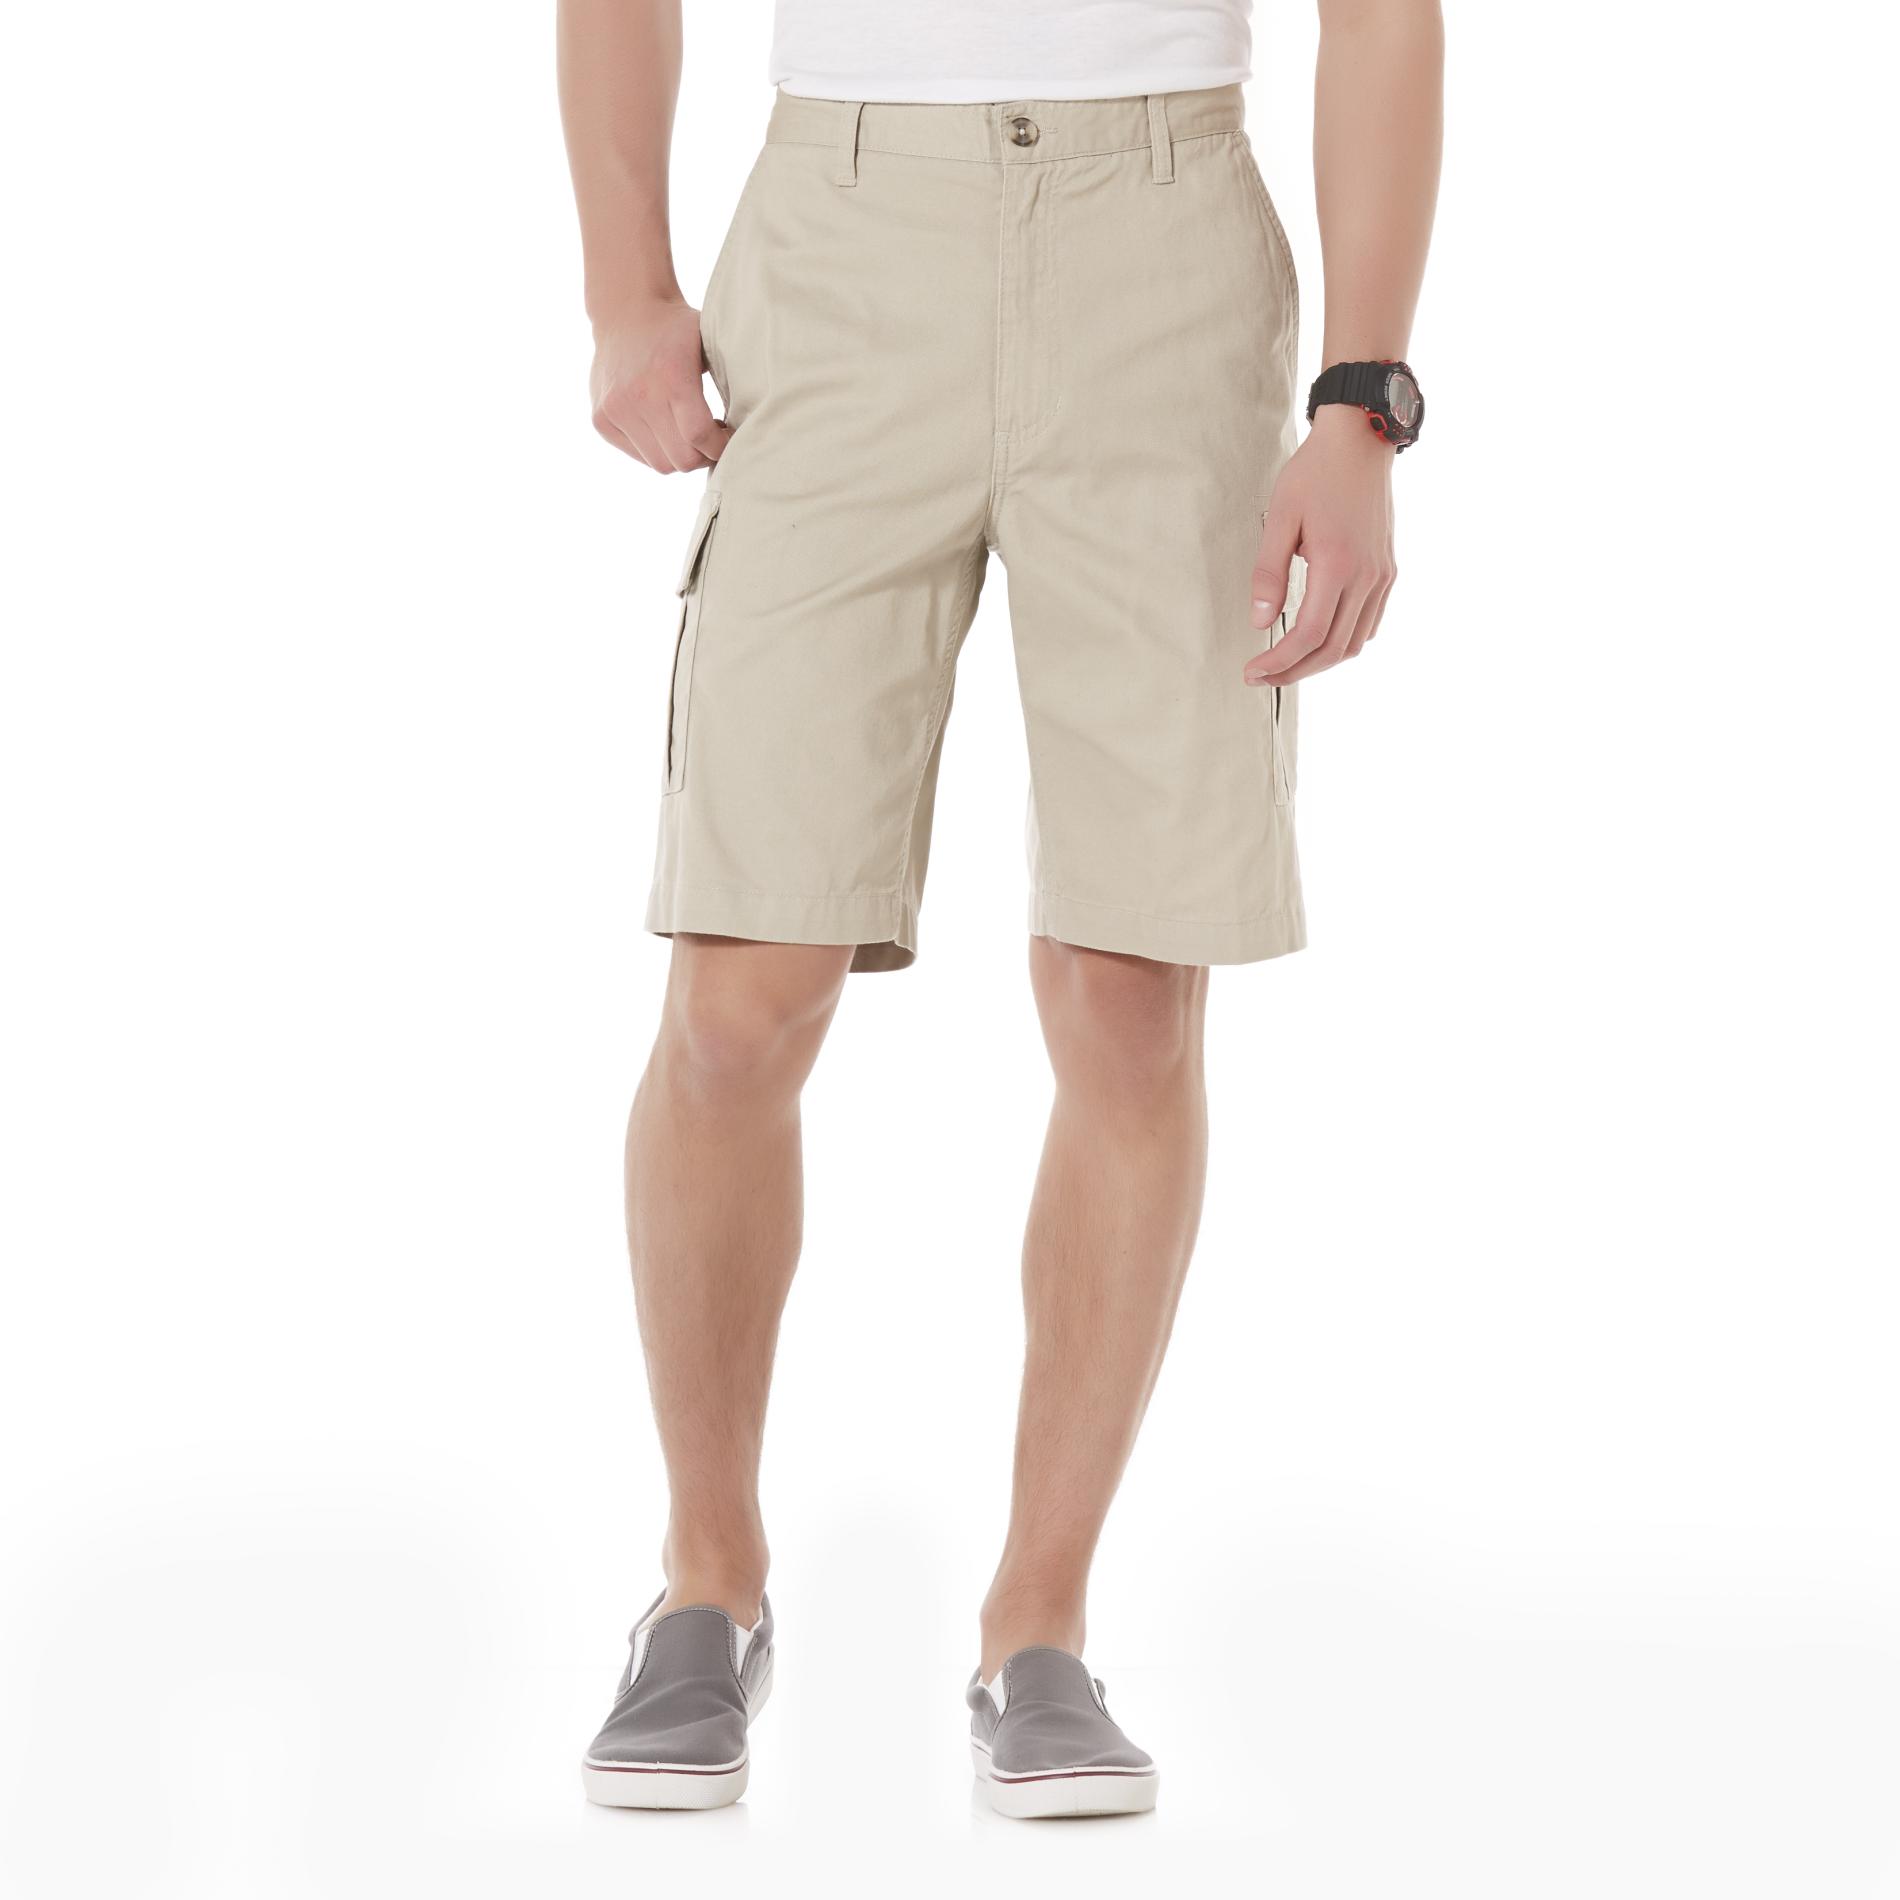 Men’s Summer Shorts From $9.49 | LOTS of Styles!